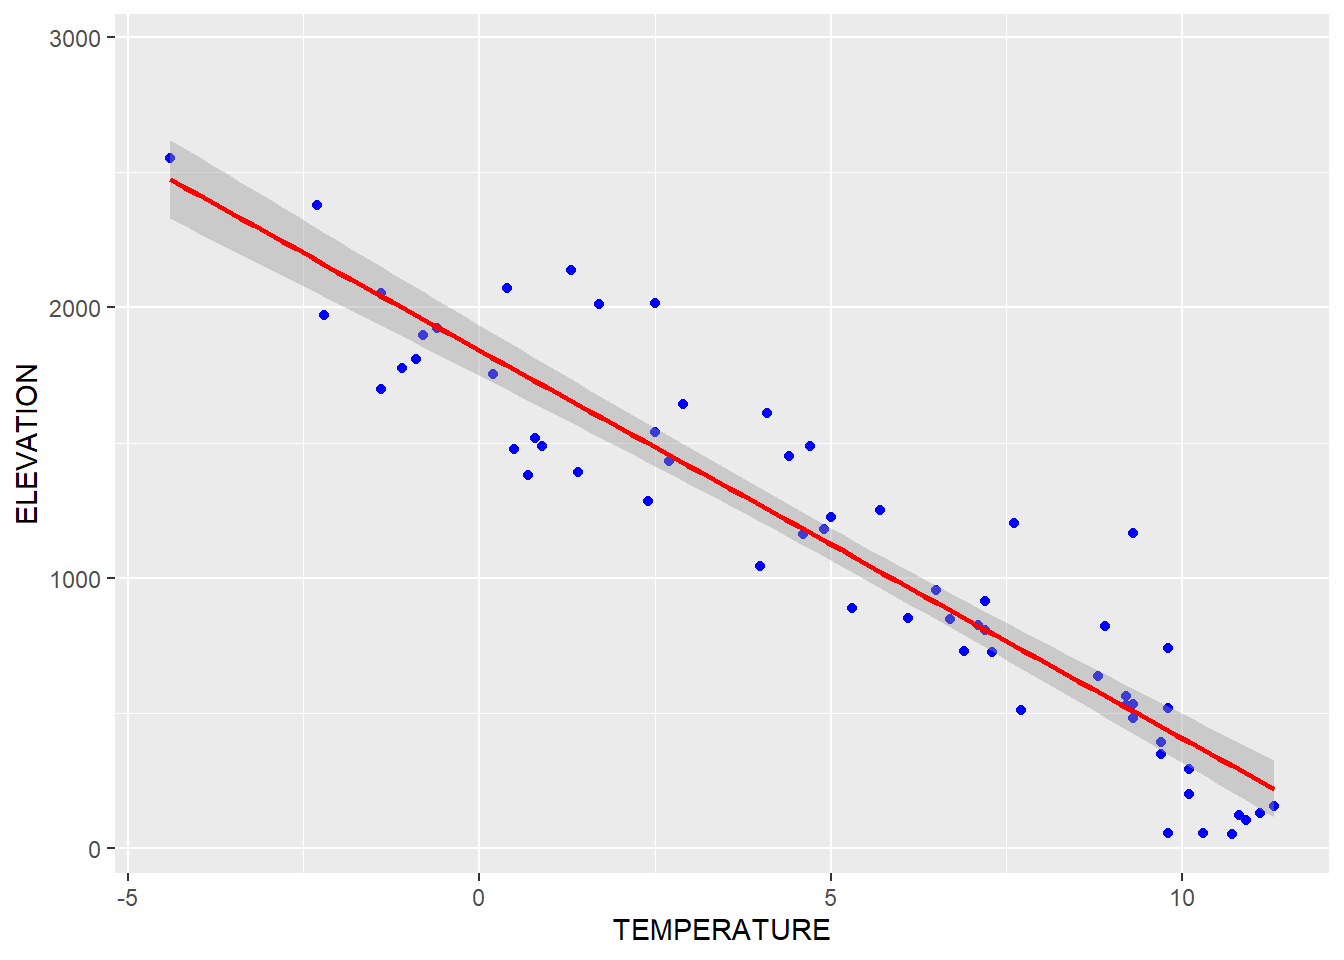 Trend line with a linear model